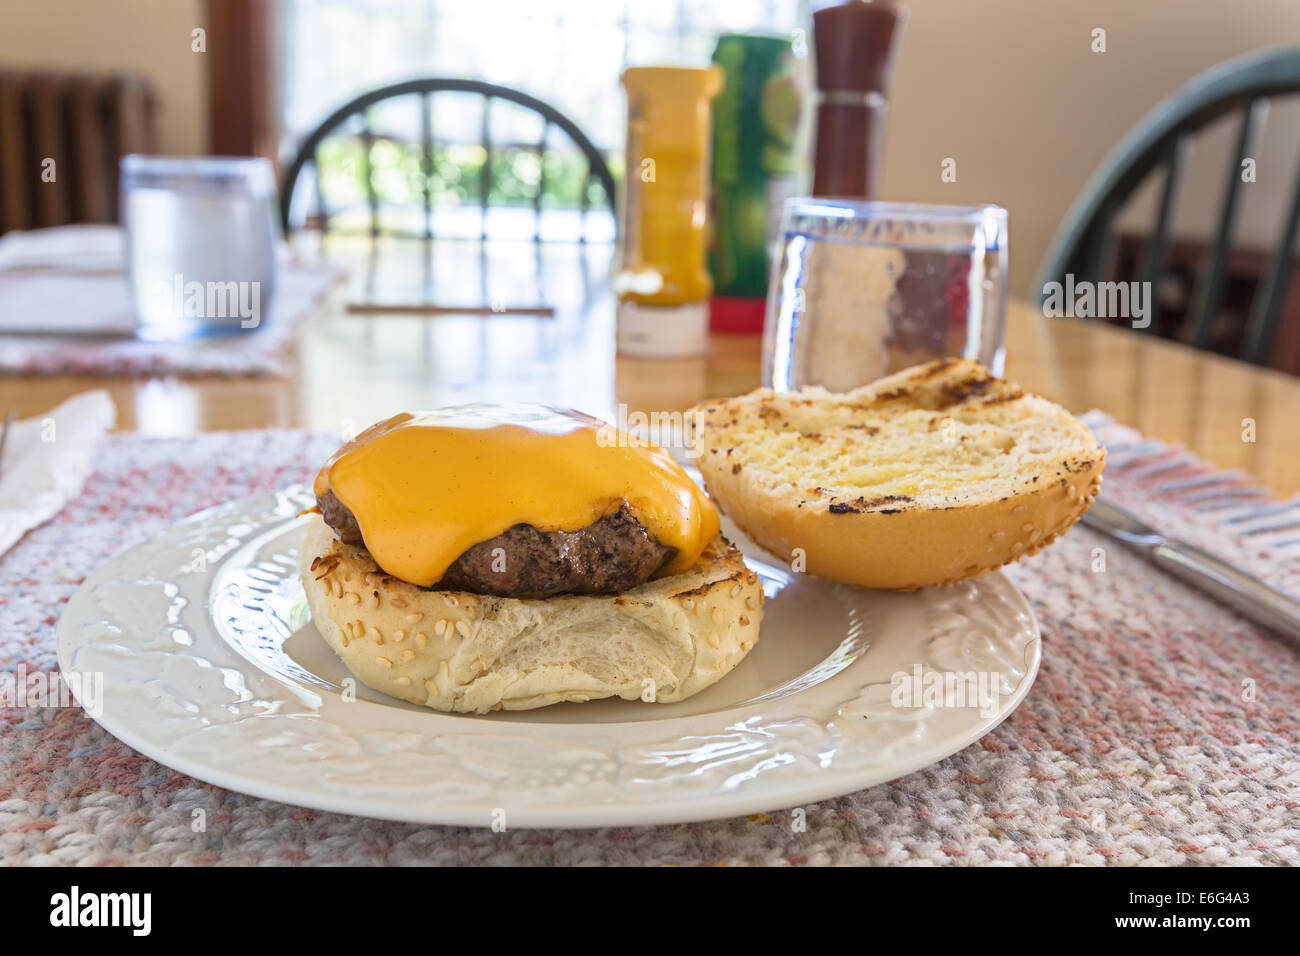 Delicious homemade hamburgers with cheese at the kitchen table. Stock Photo